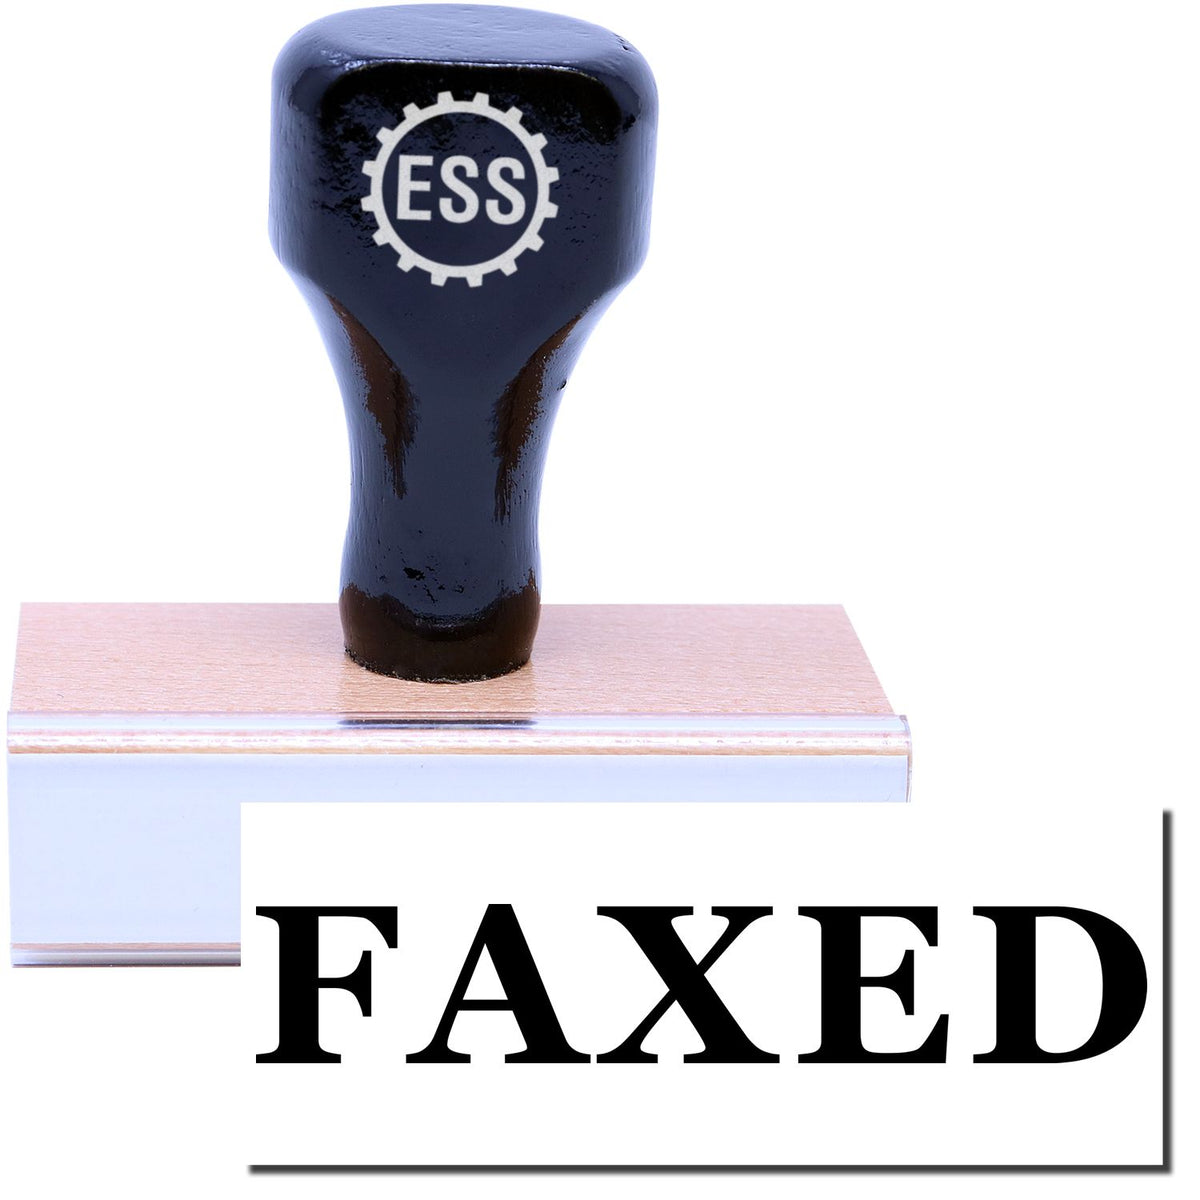 A stock office rubber stamp with a stamped image showing how the text &quot;FAXED&quot; in Times font is displayed after stamping.